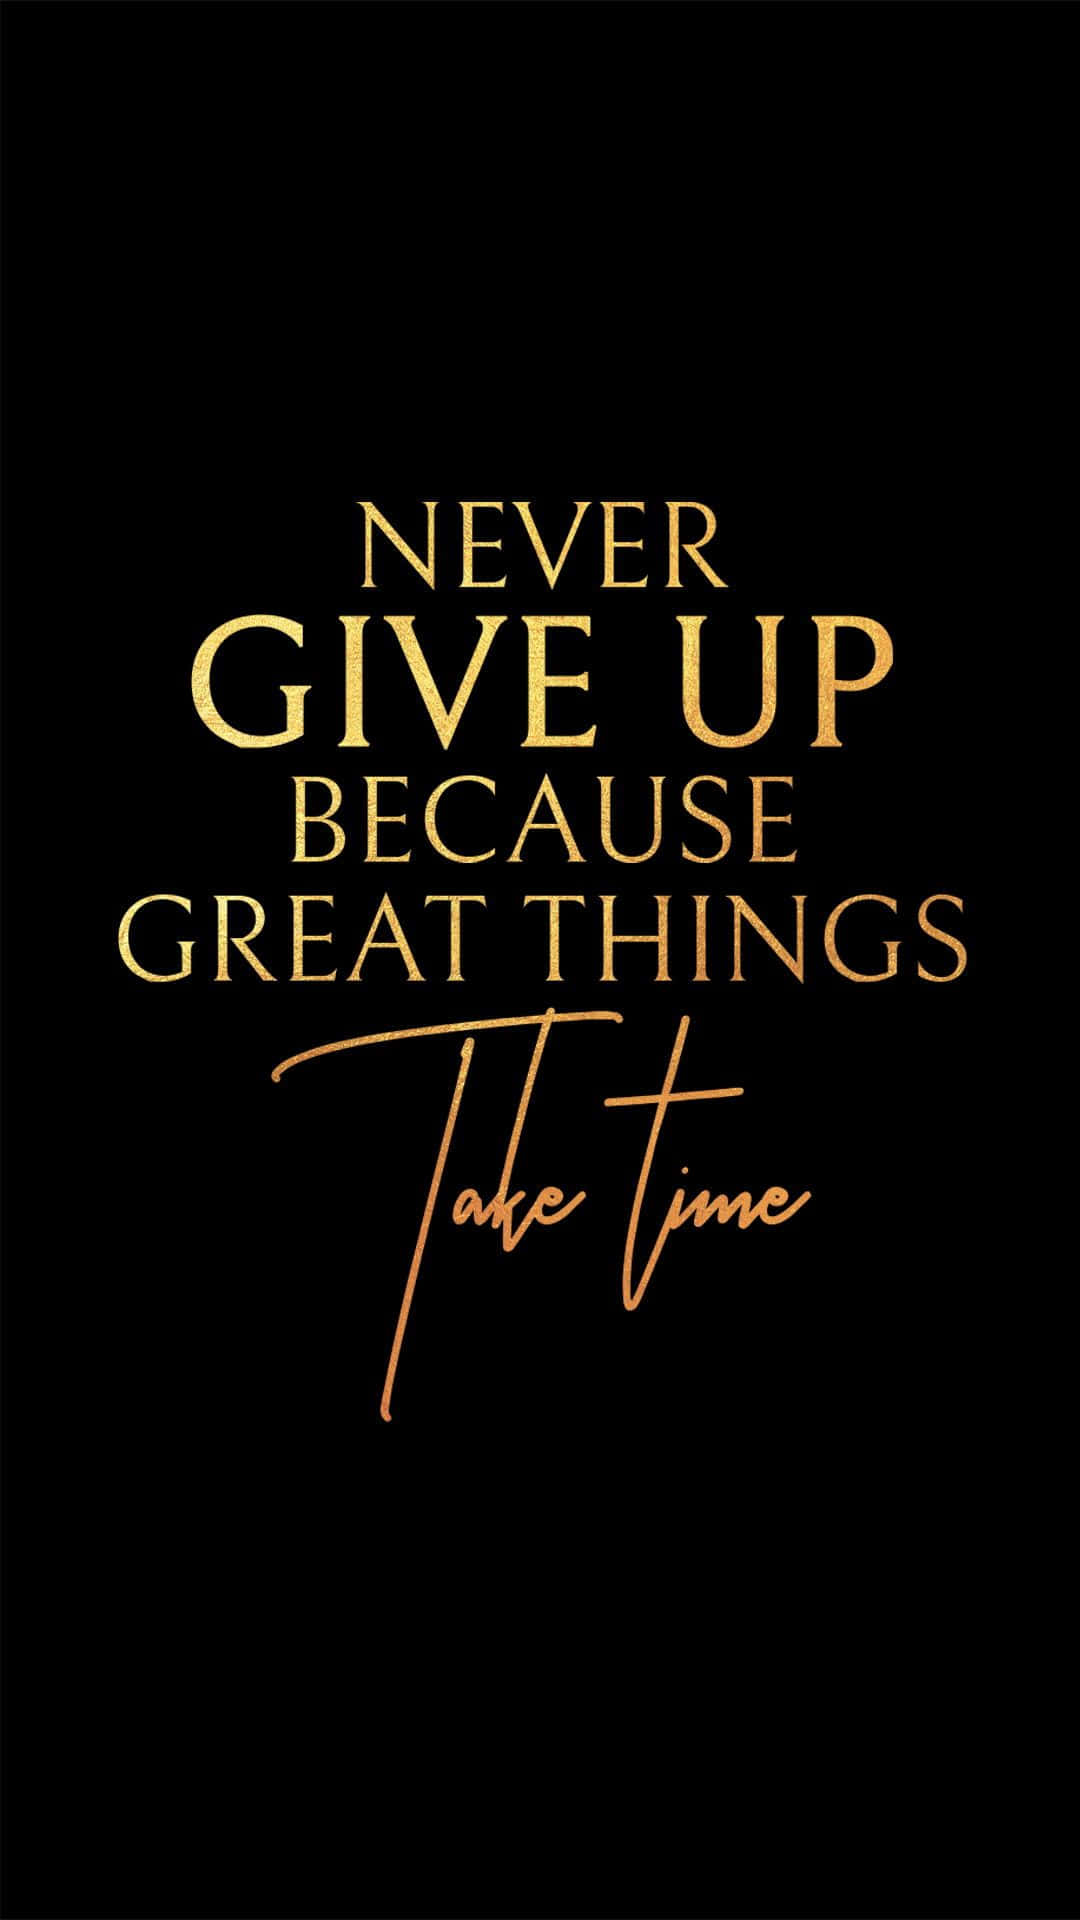 Never Give Up Because Great Things Take Time